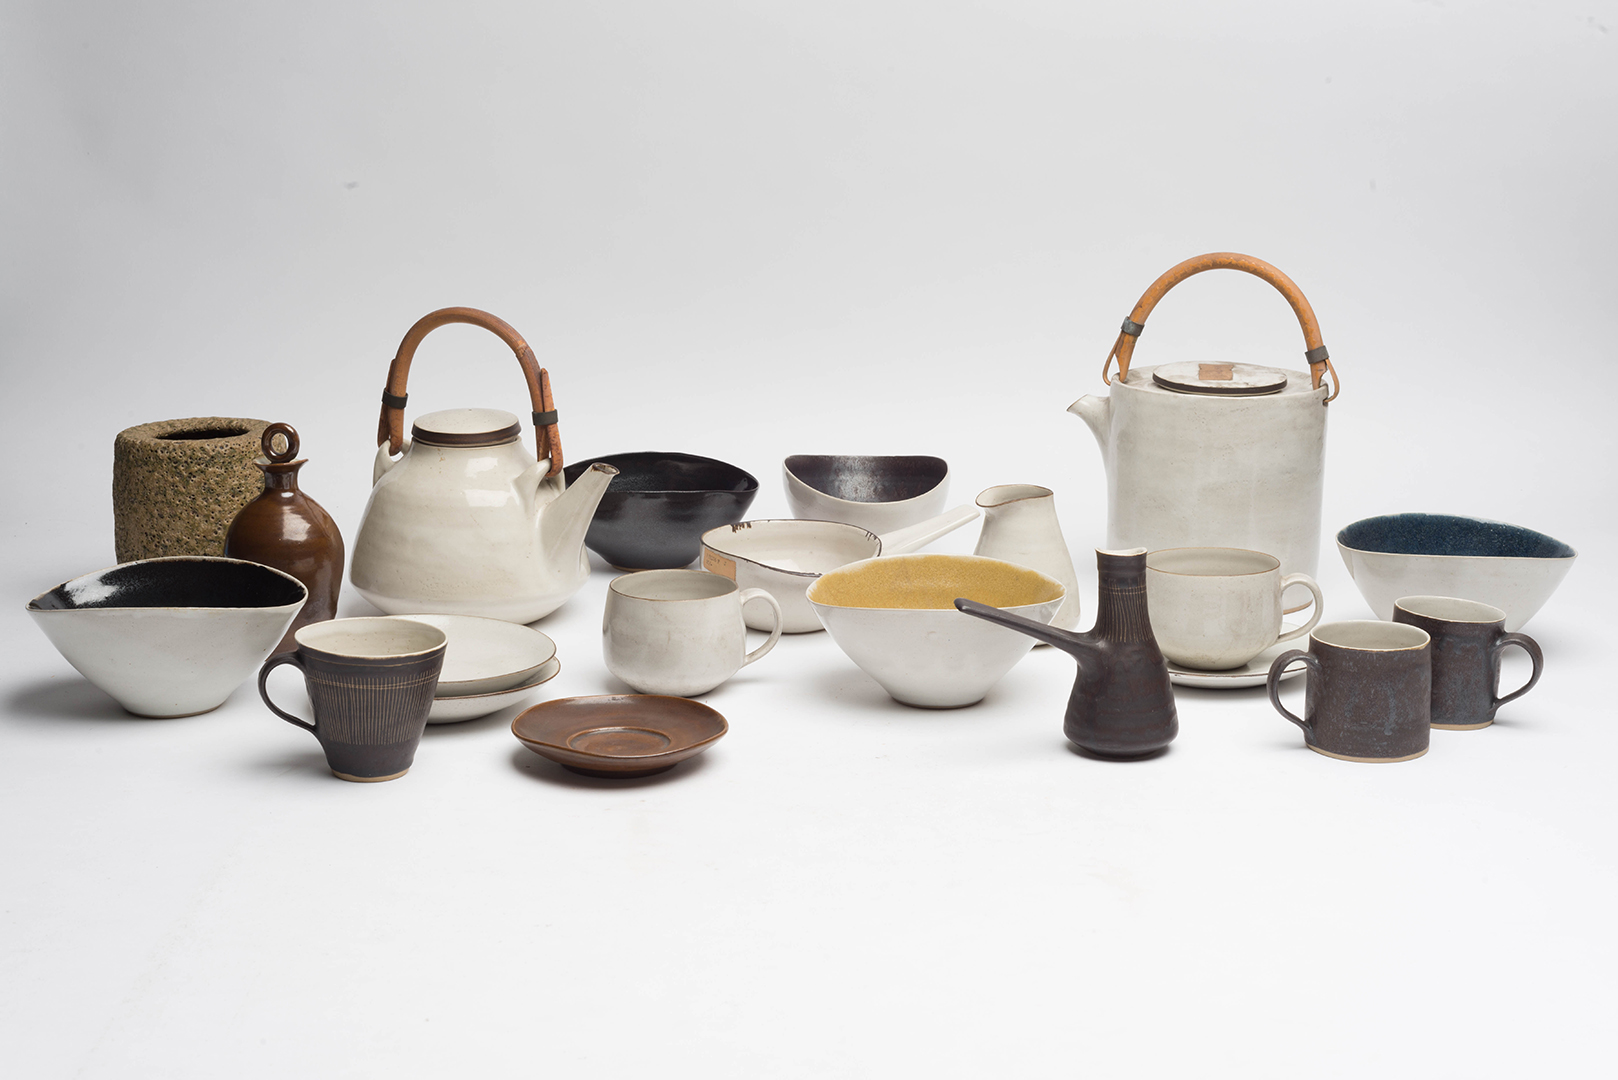 Colour photograph showing an assortment of mid 20th century ceramic pots and saucers